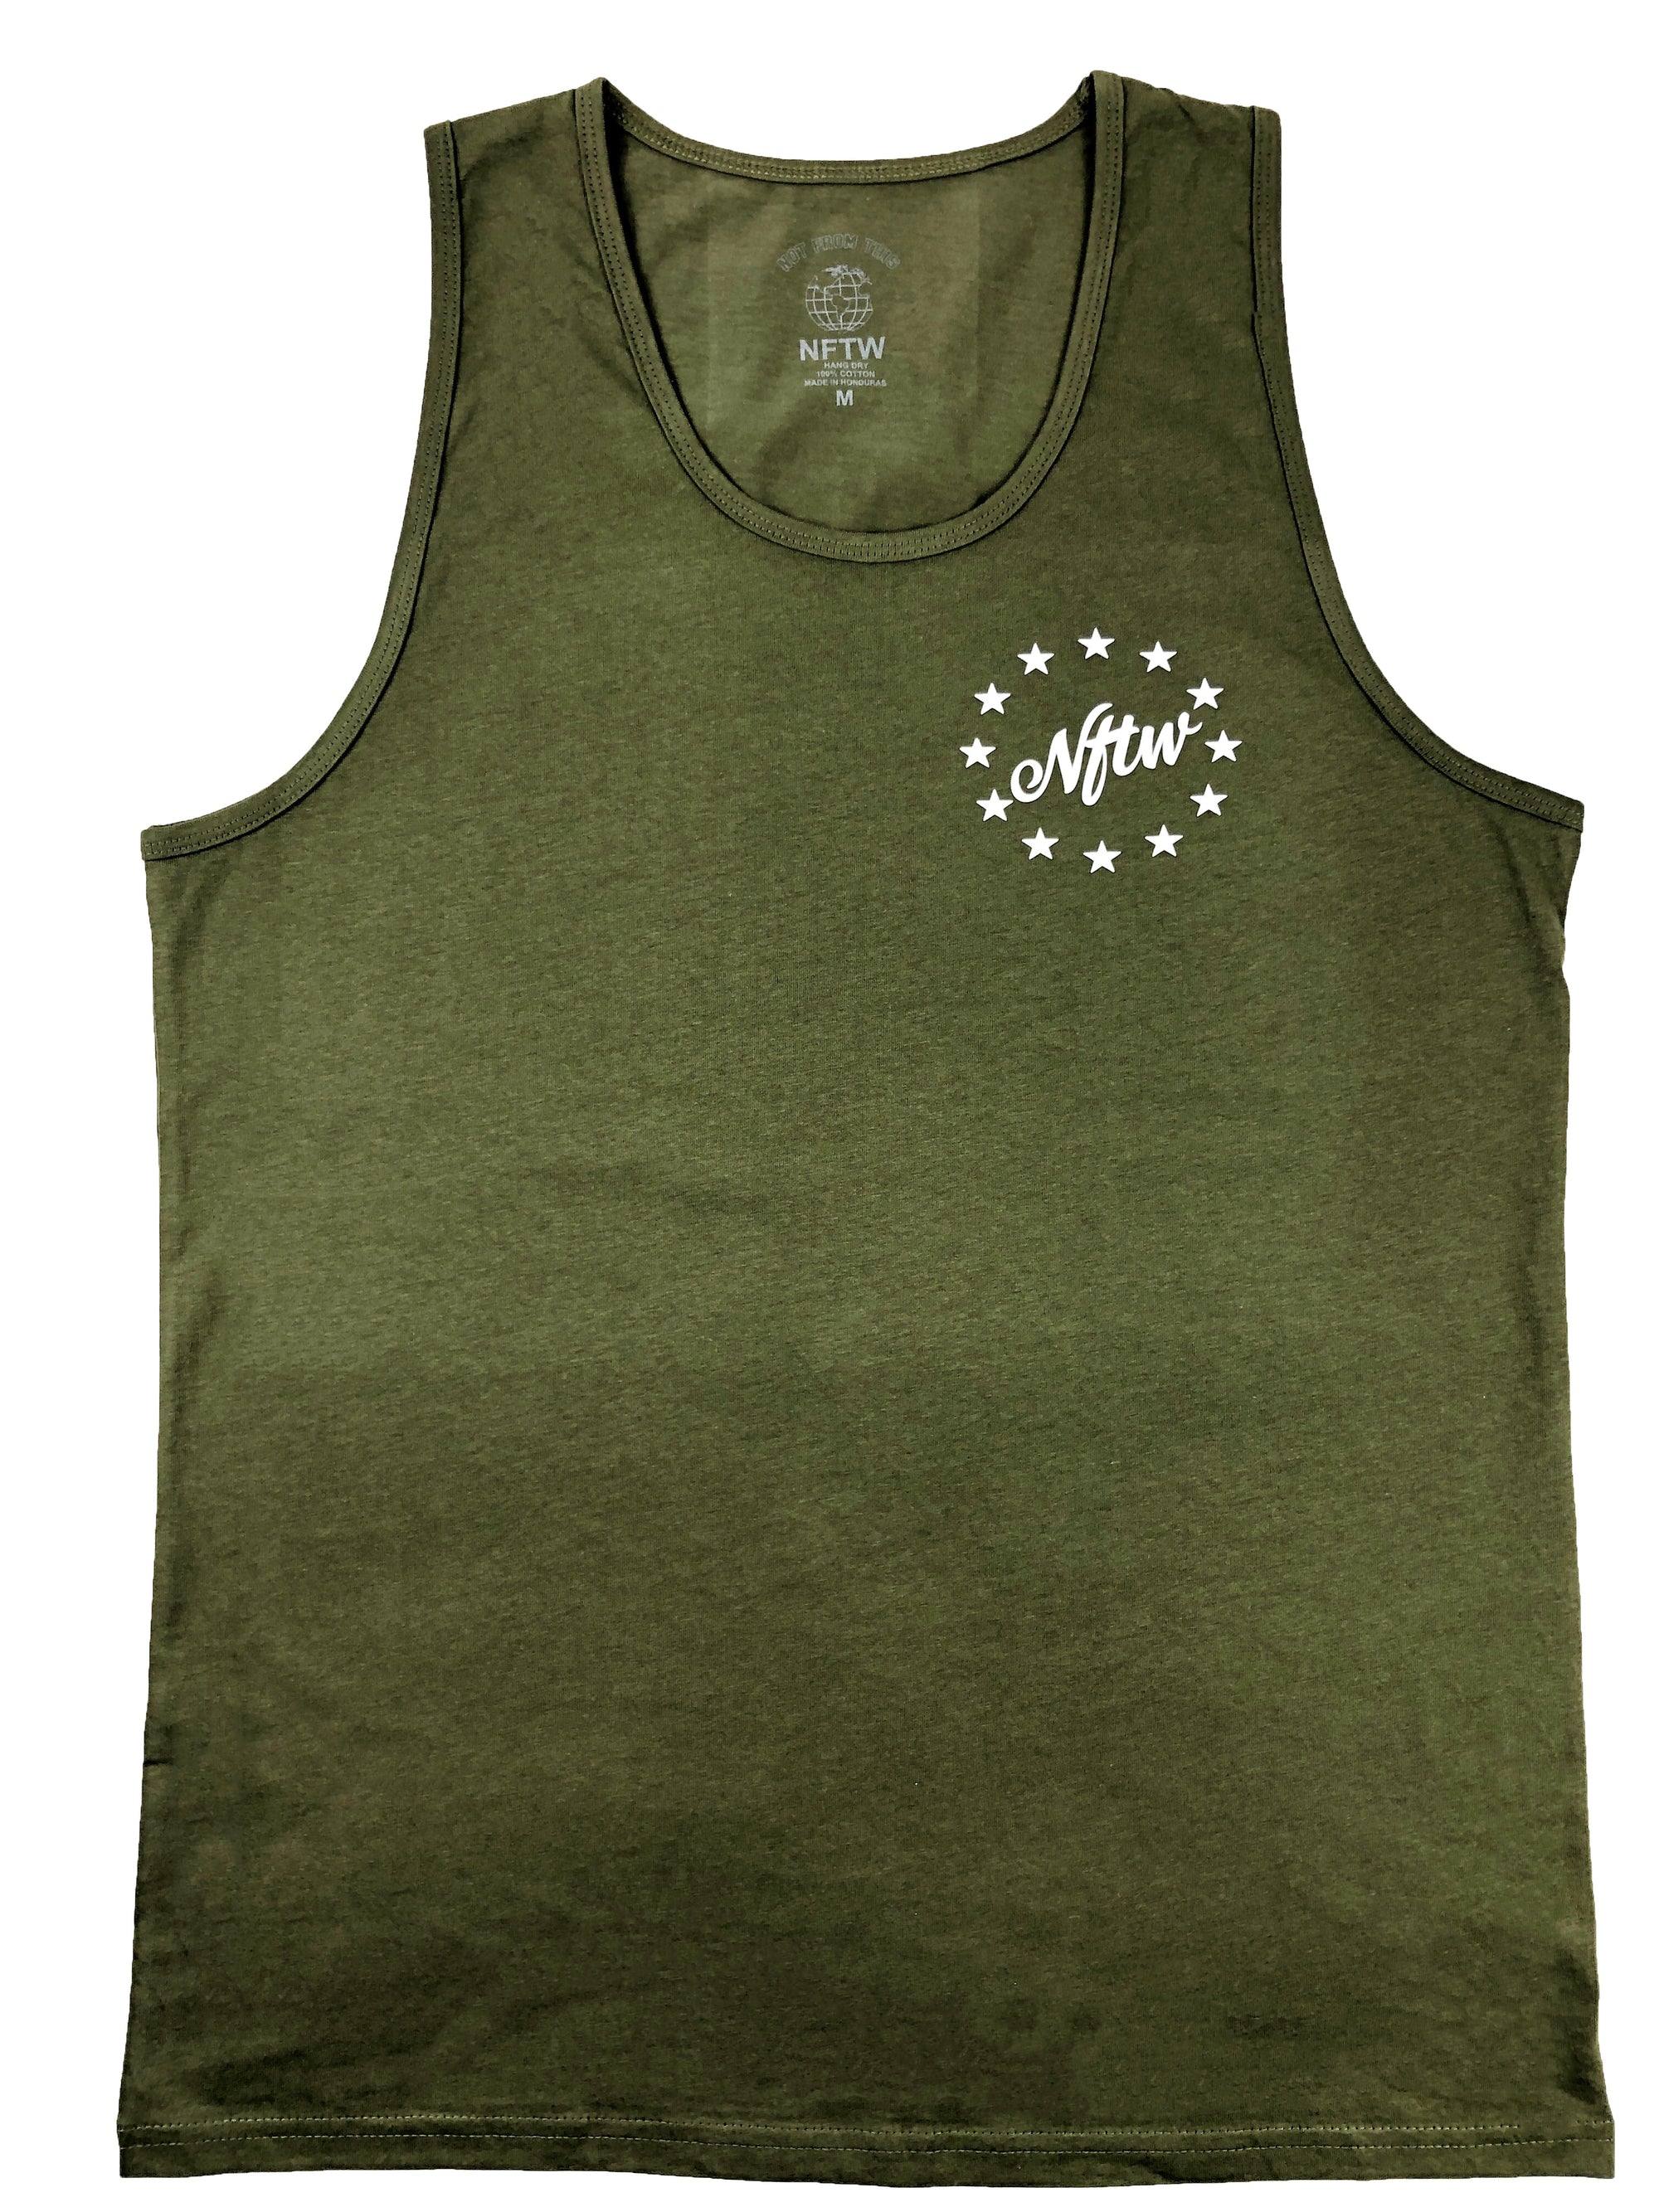 NFTW Tank Top in Olive